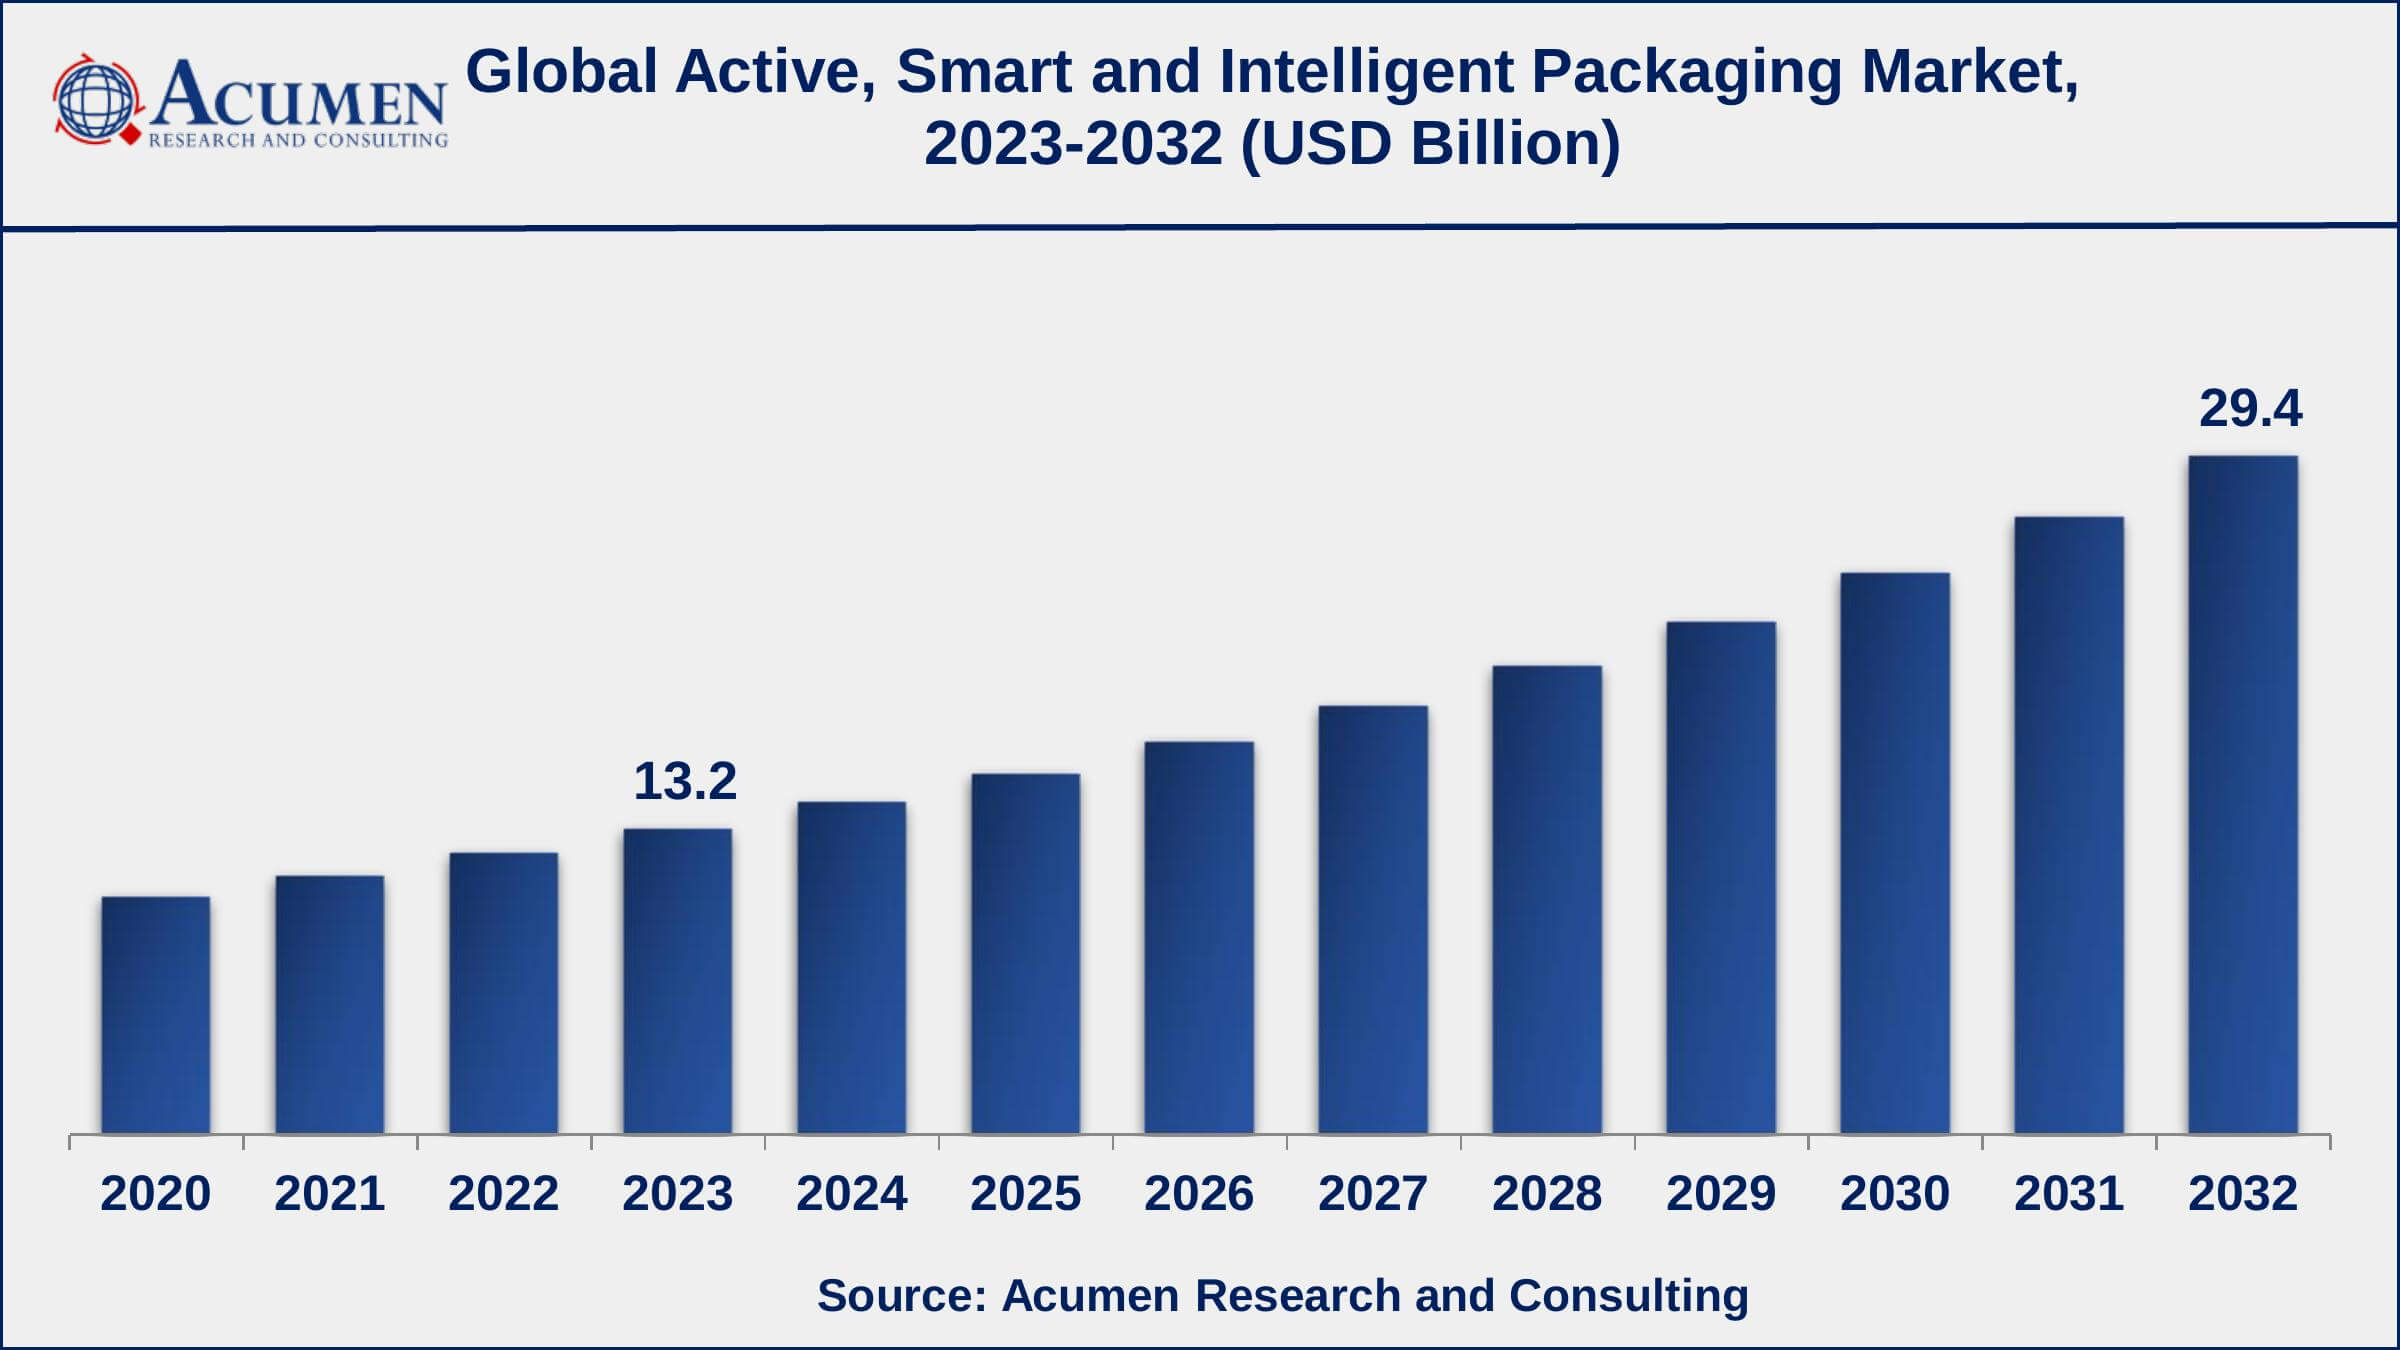 Global Active Smart and Intelligent Packaging Market Dynamics